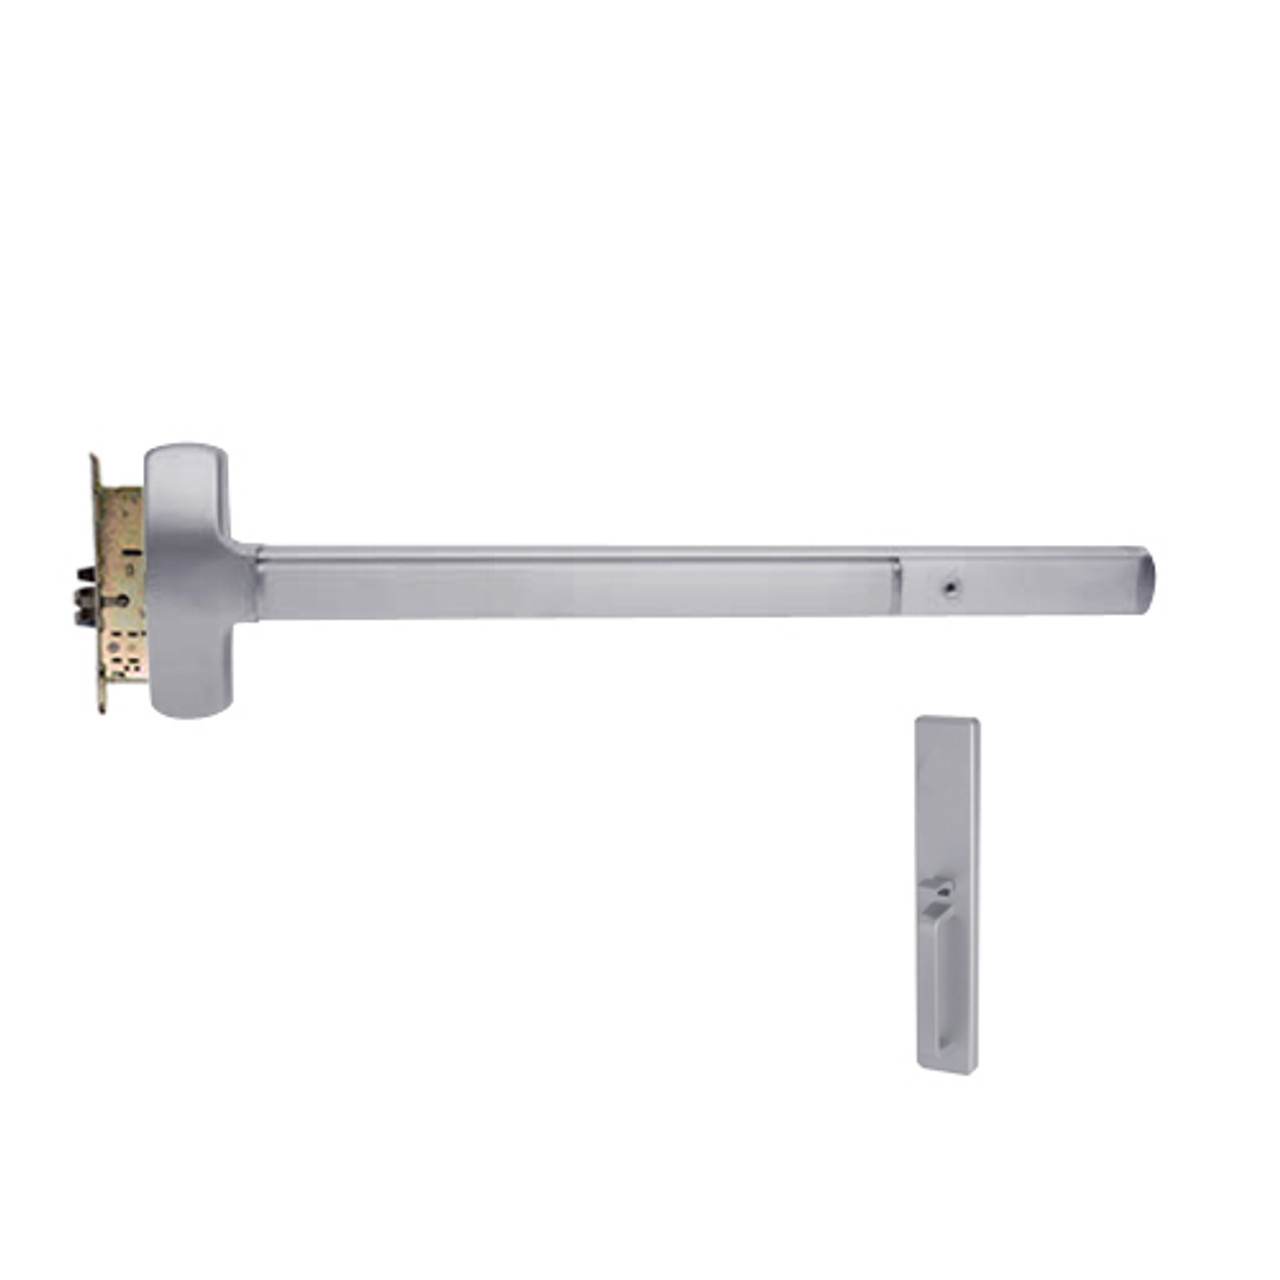 25-M-TP-BE-US26D-3-LHR Falcon Exit Device in Satin Chrome